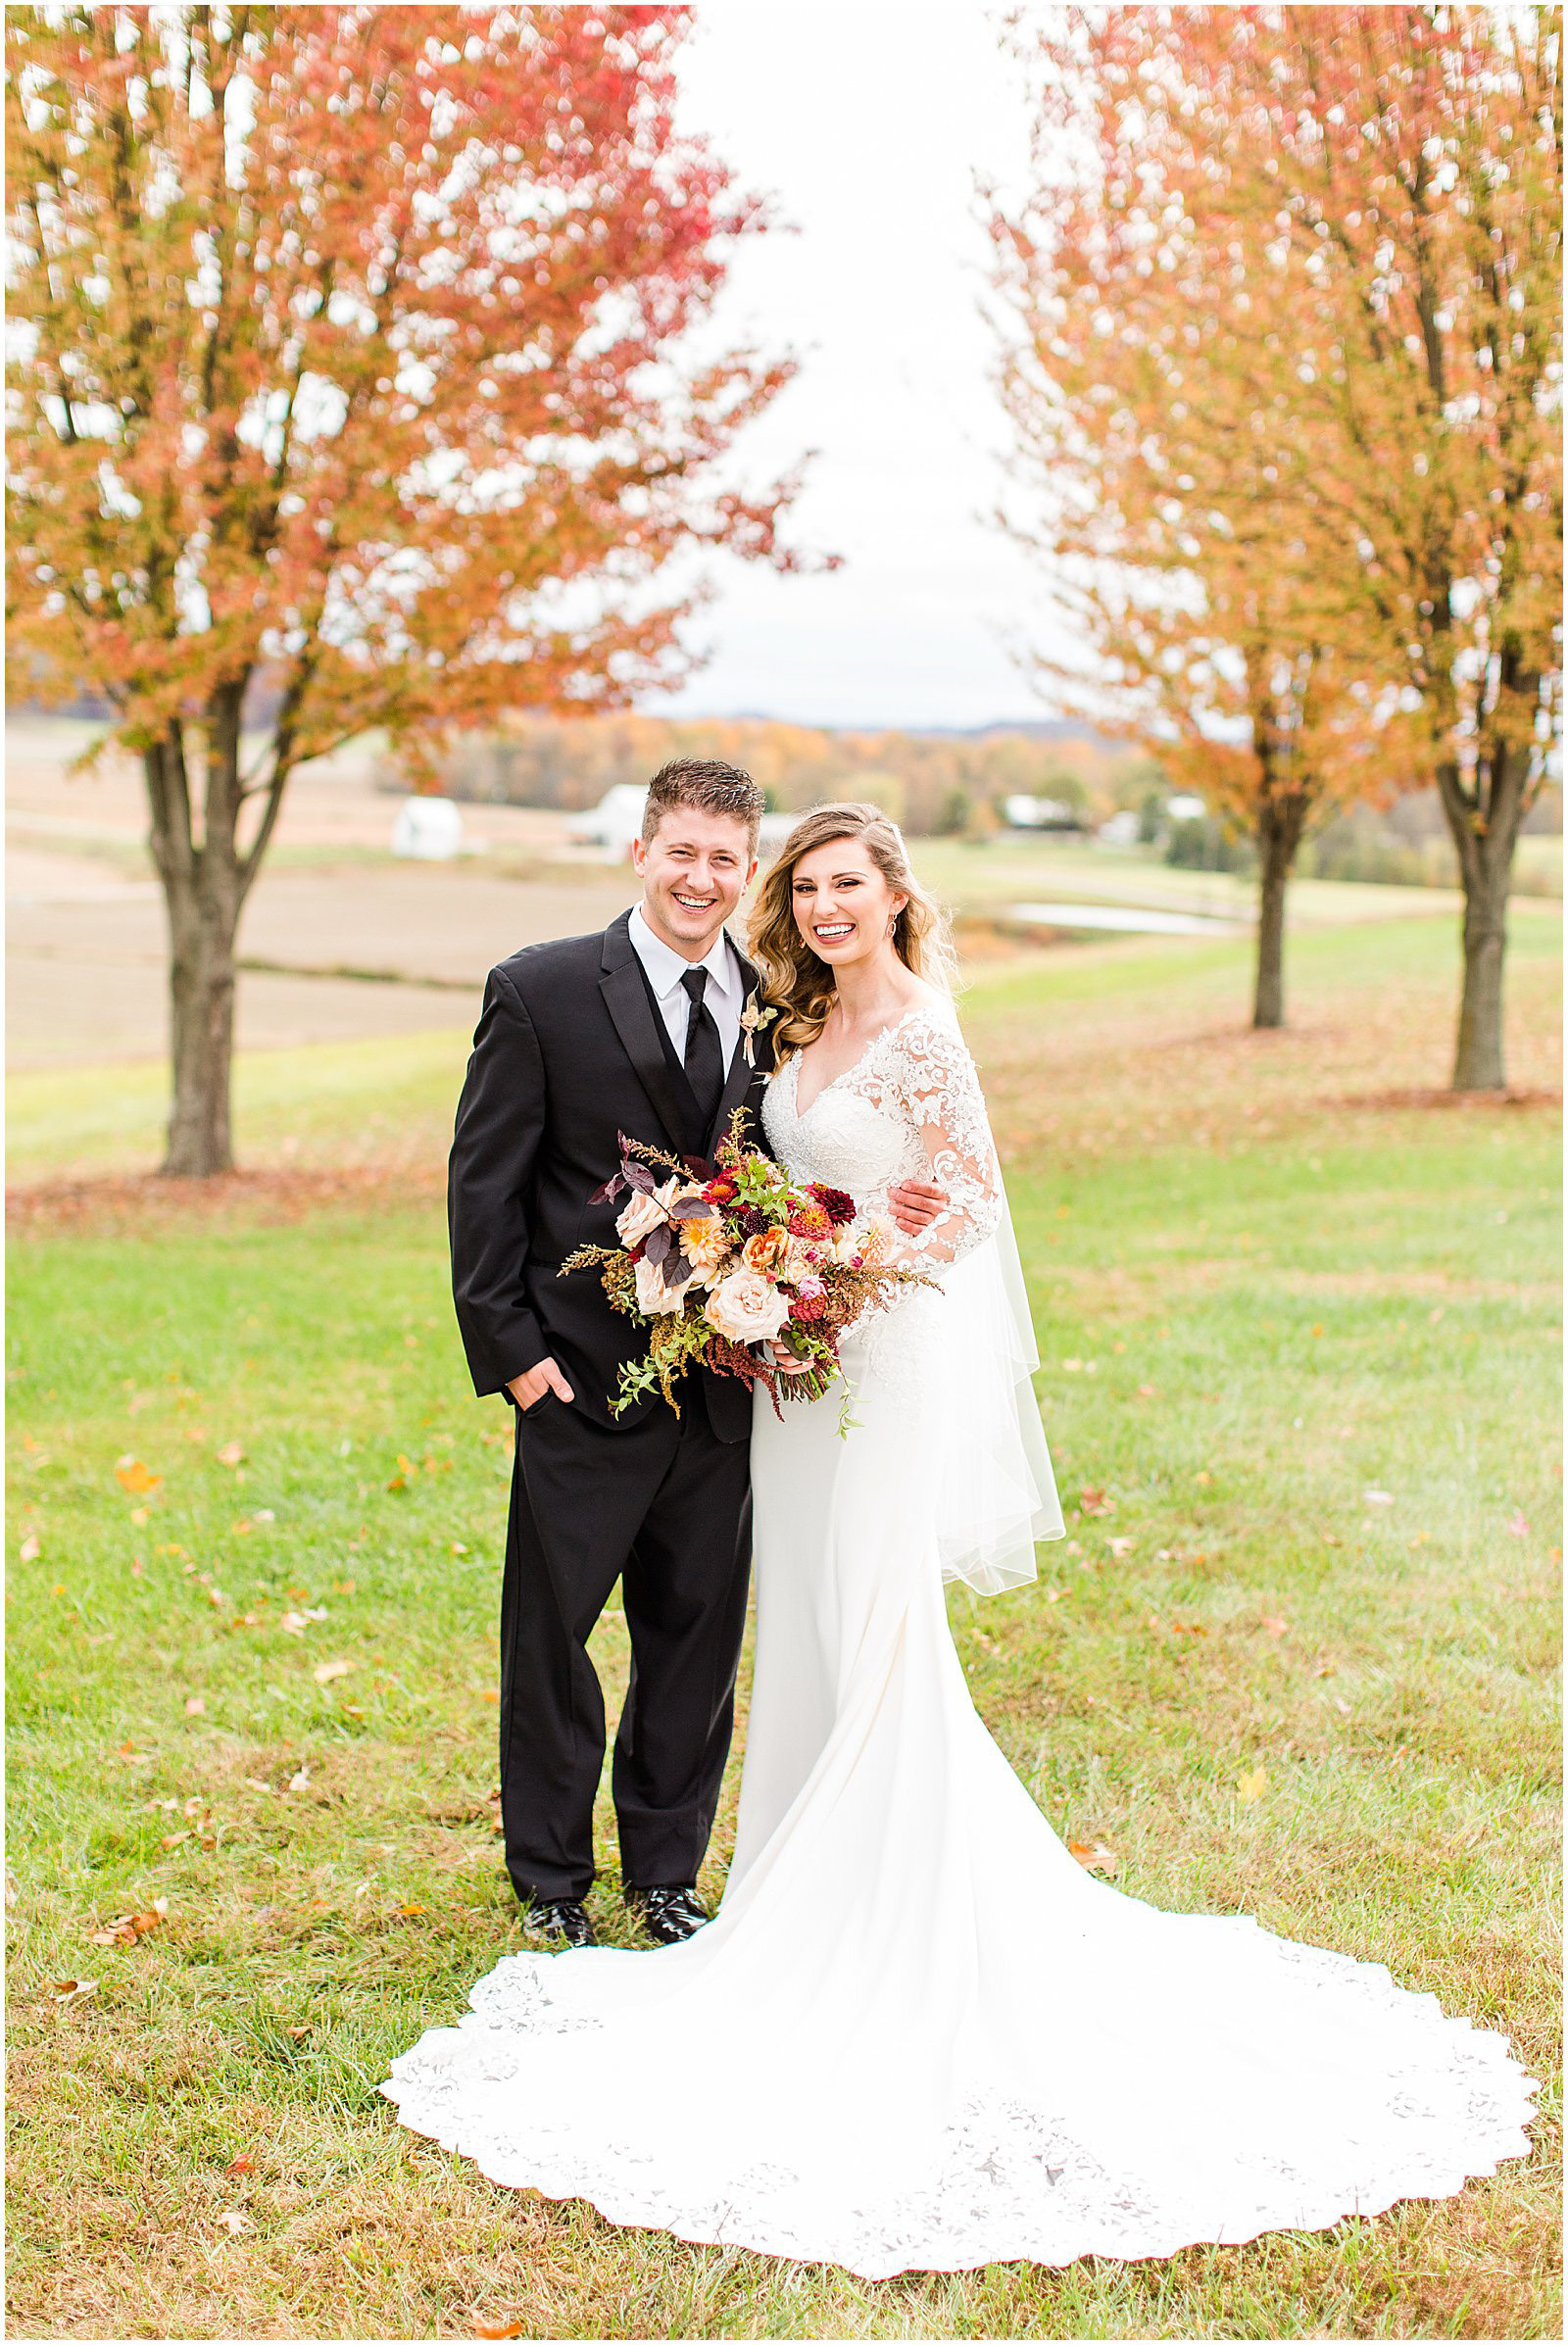 A Romantic Fall Wedding in Ferdinand, IN | Tori and Kyle | Bret and Brandie Photography 0062.jpg